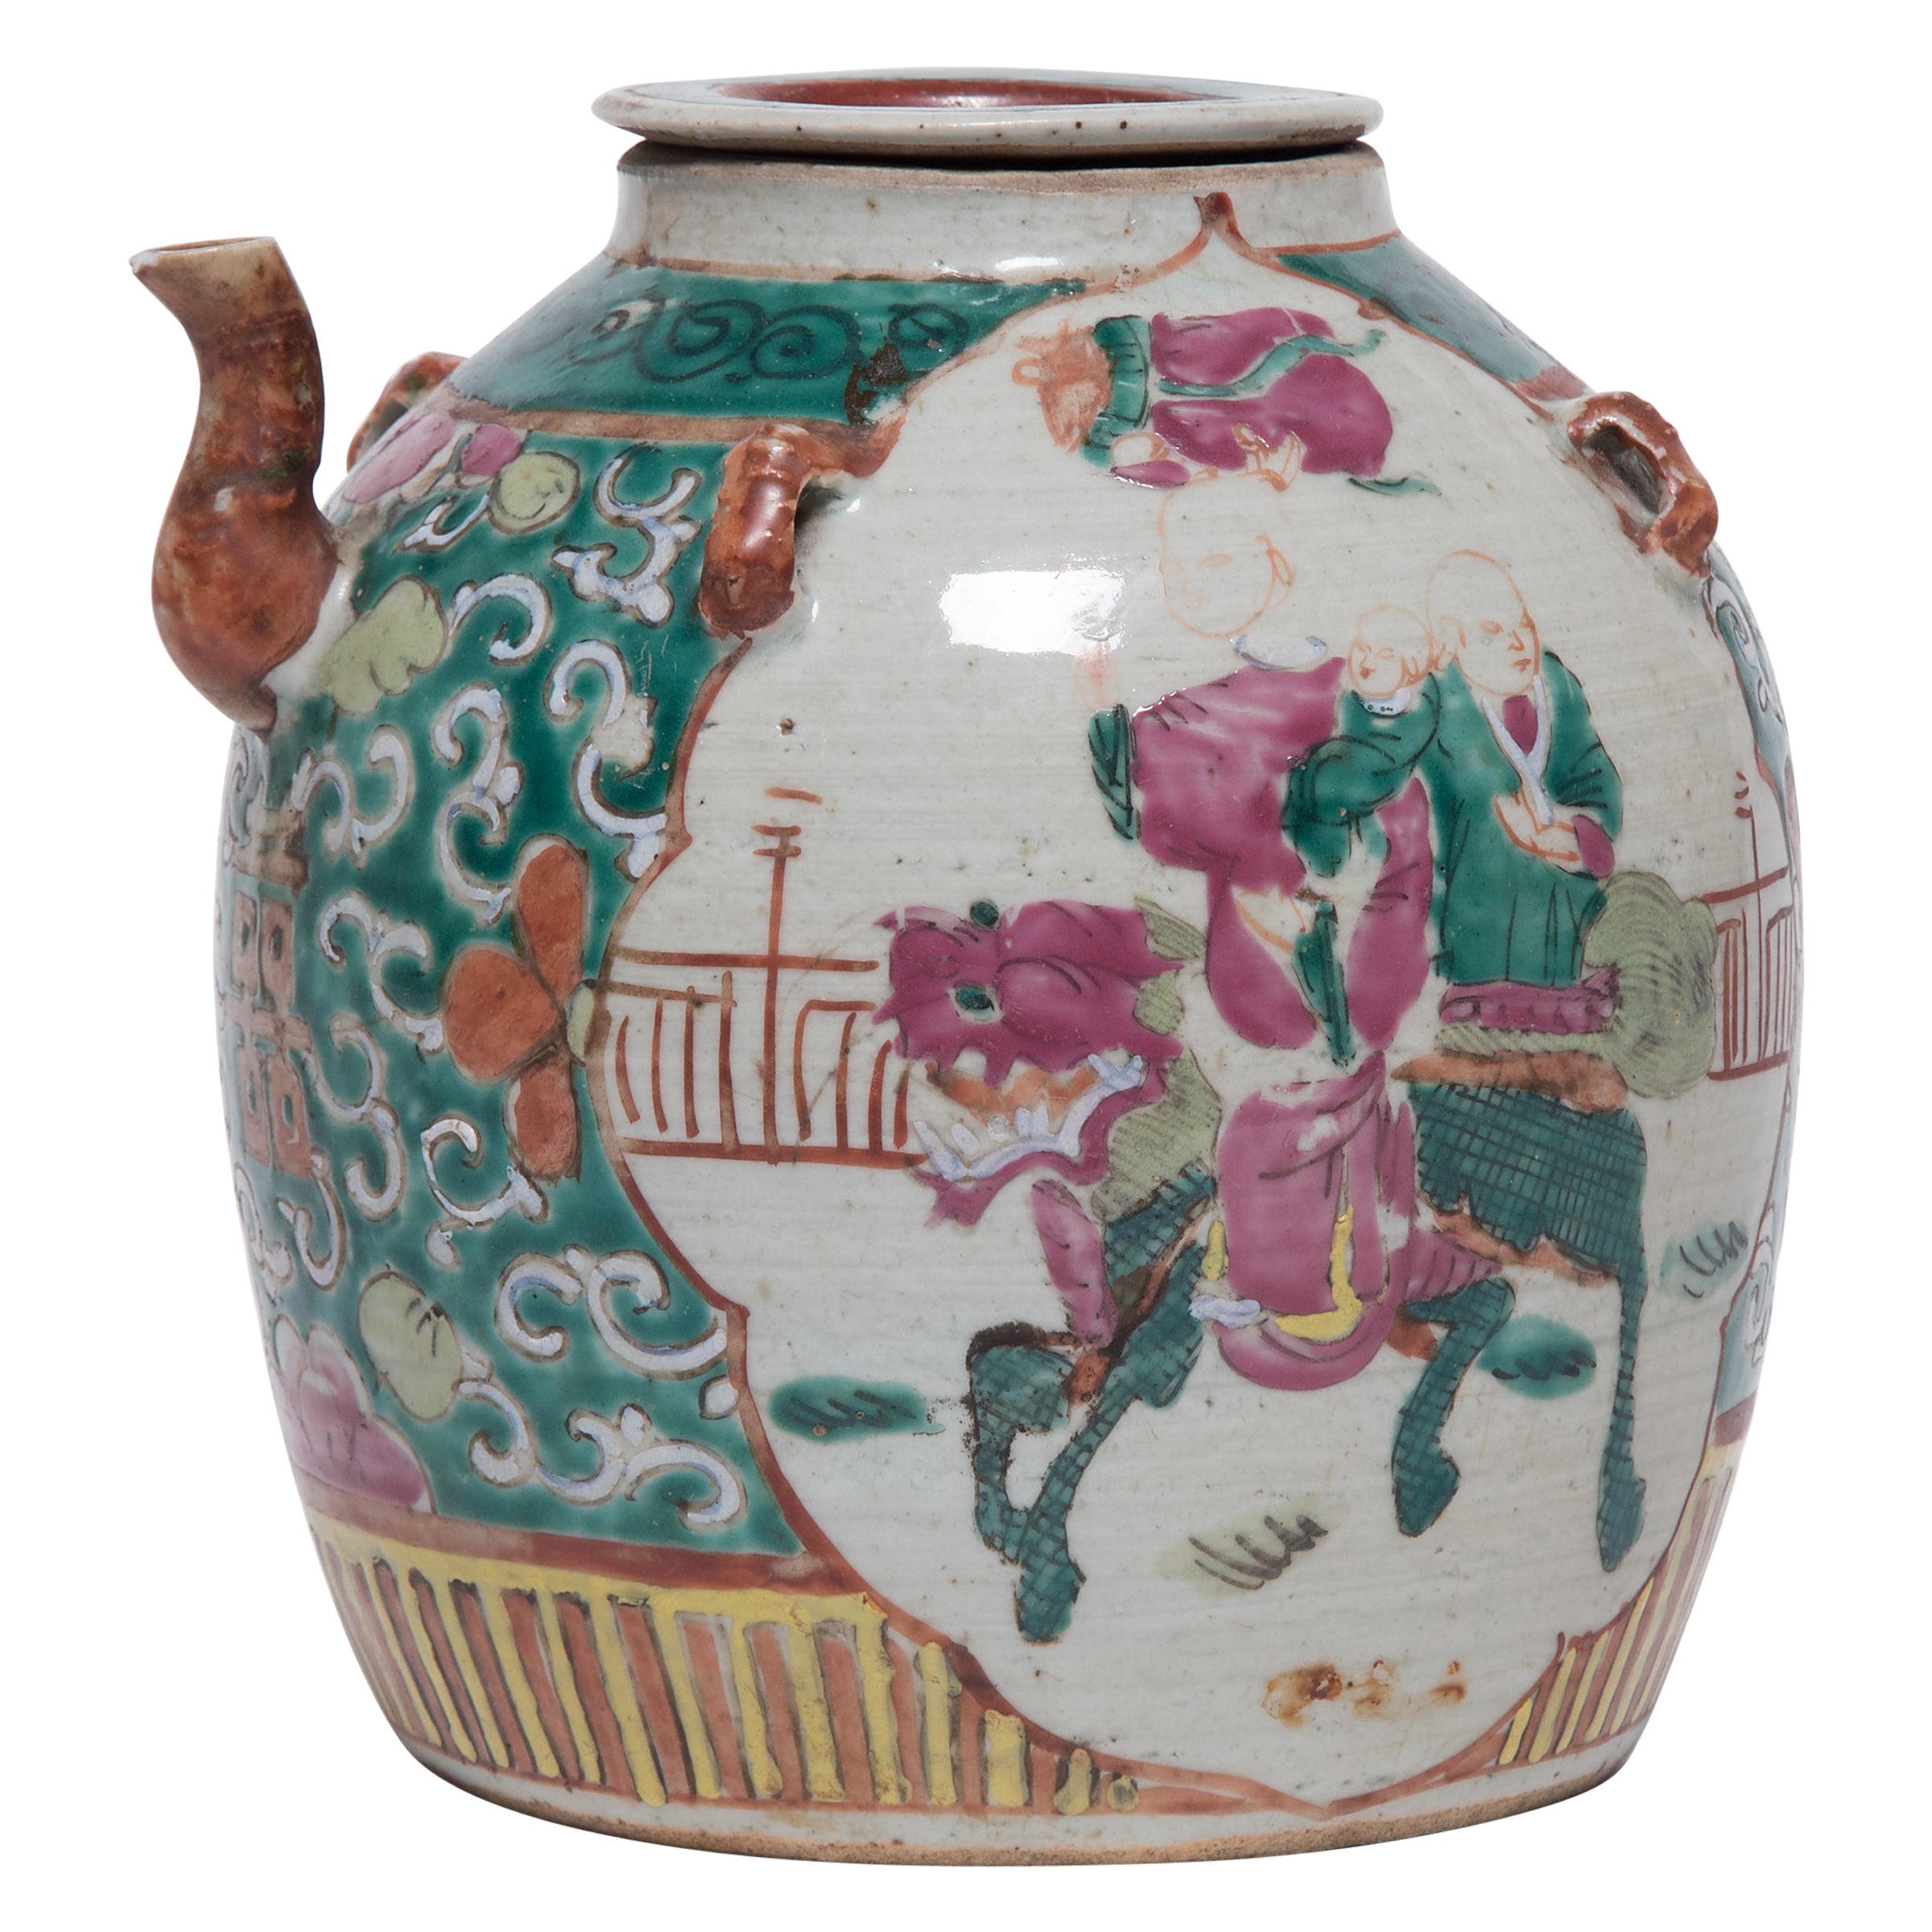 Chinese Enamelware Teapot with Mythical Qilin, c. 1920s